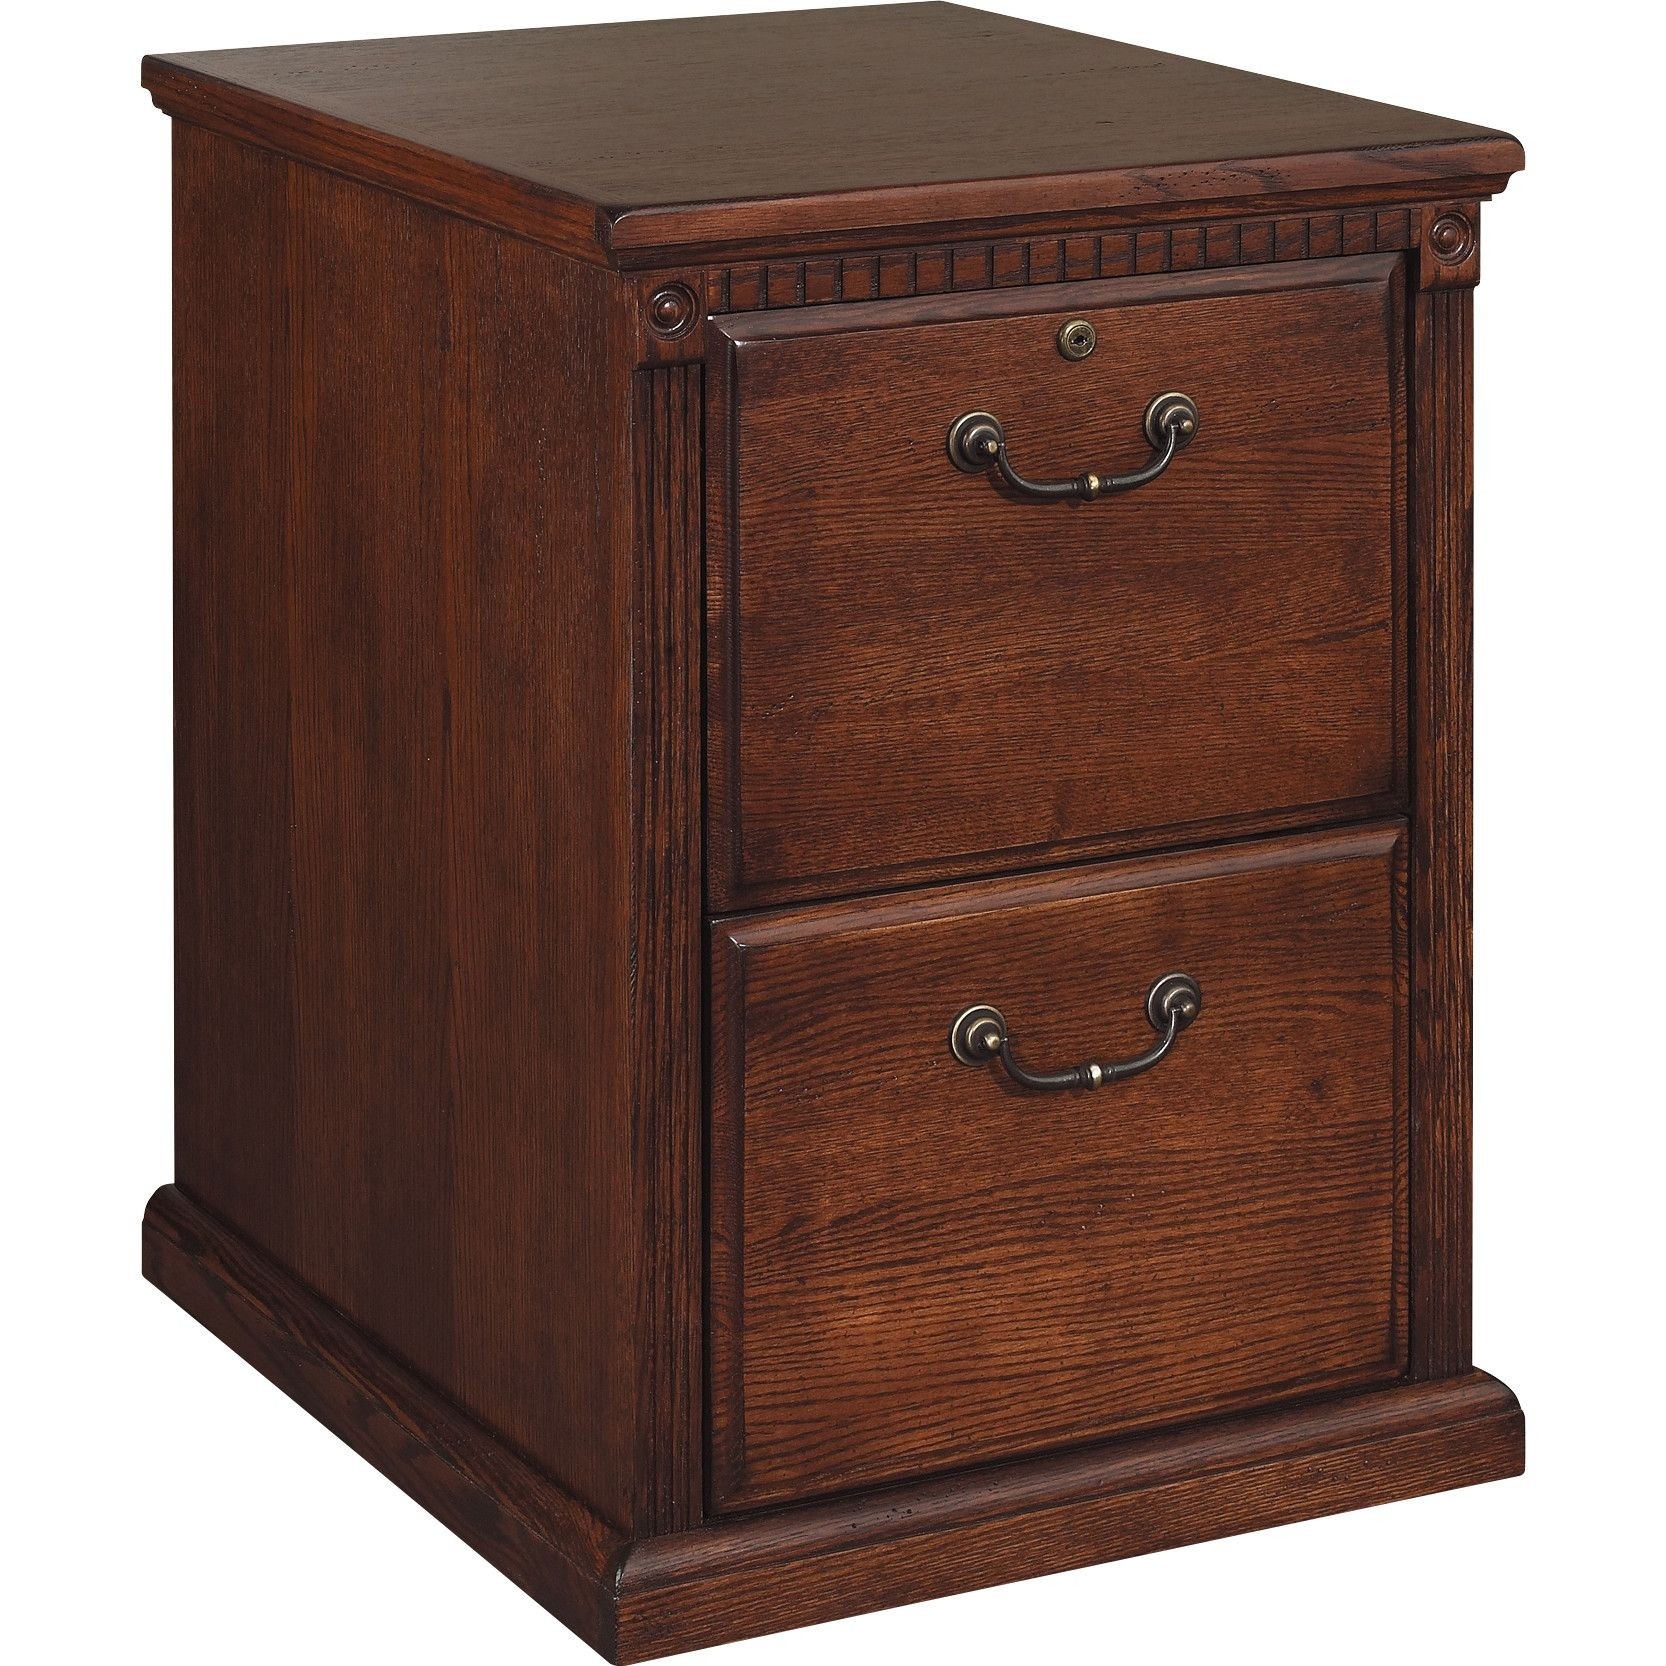 Solid wood file cabinet 2 drawer